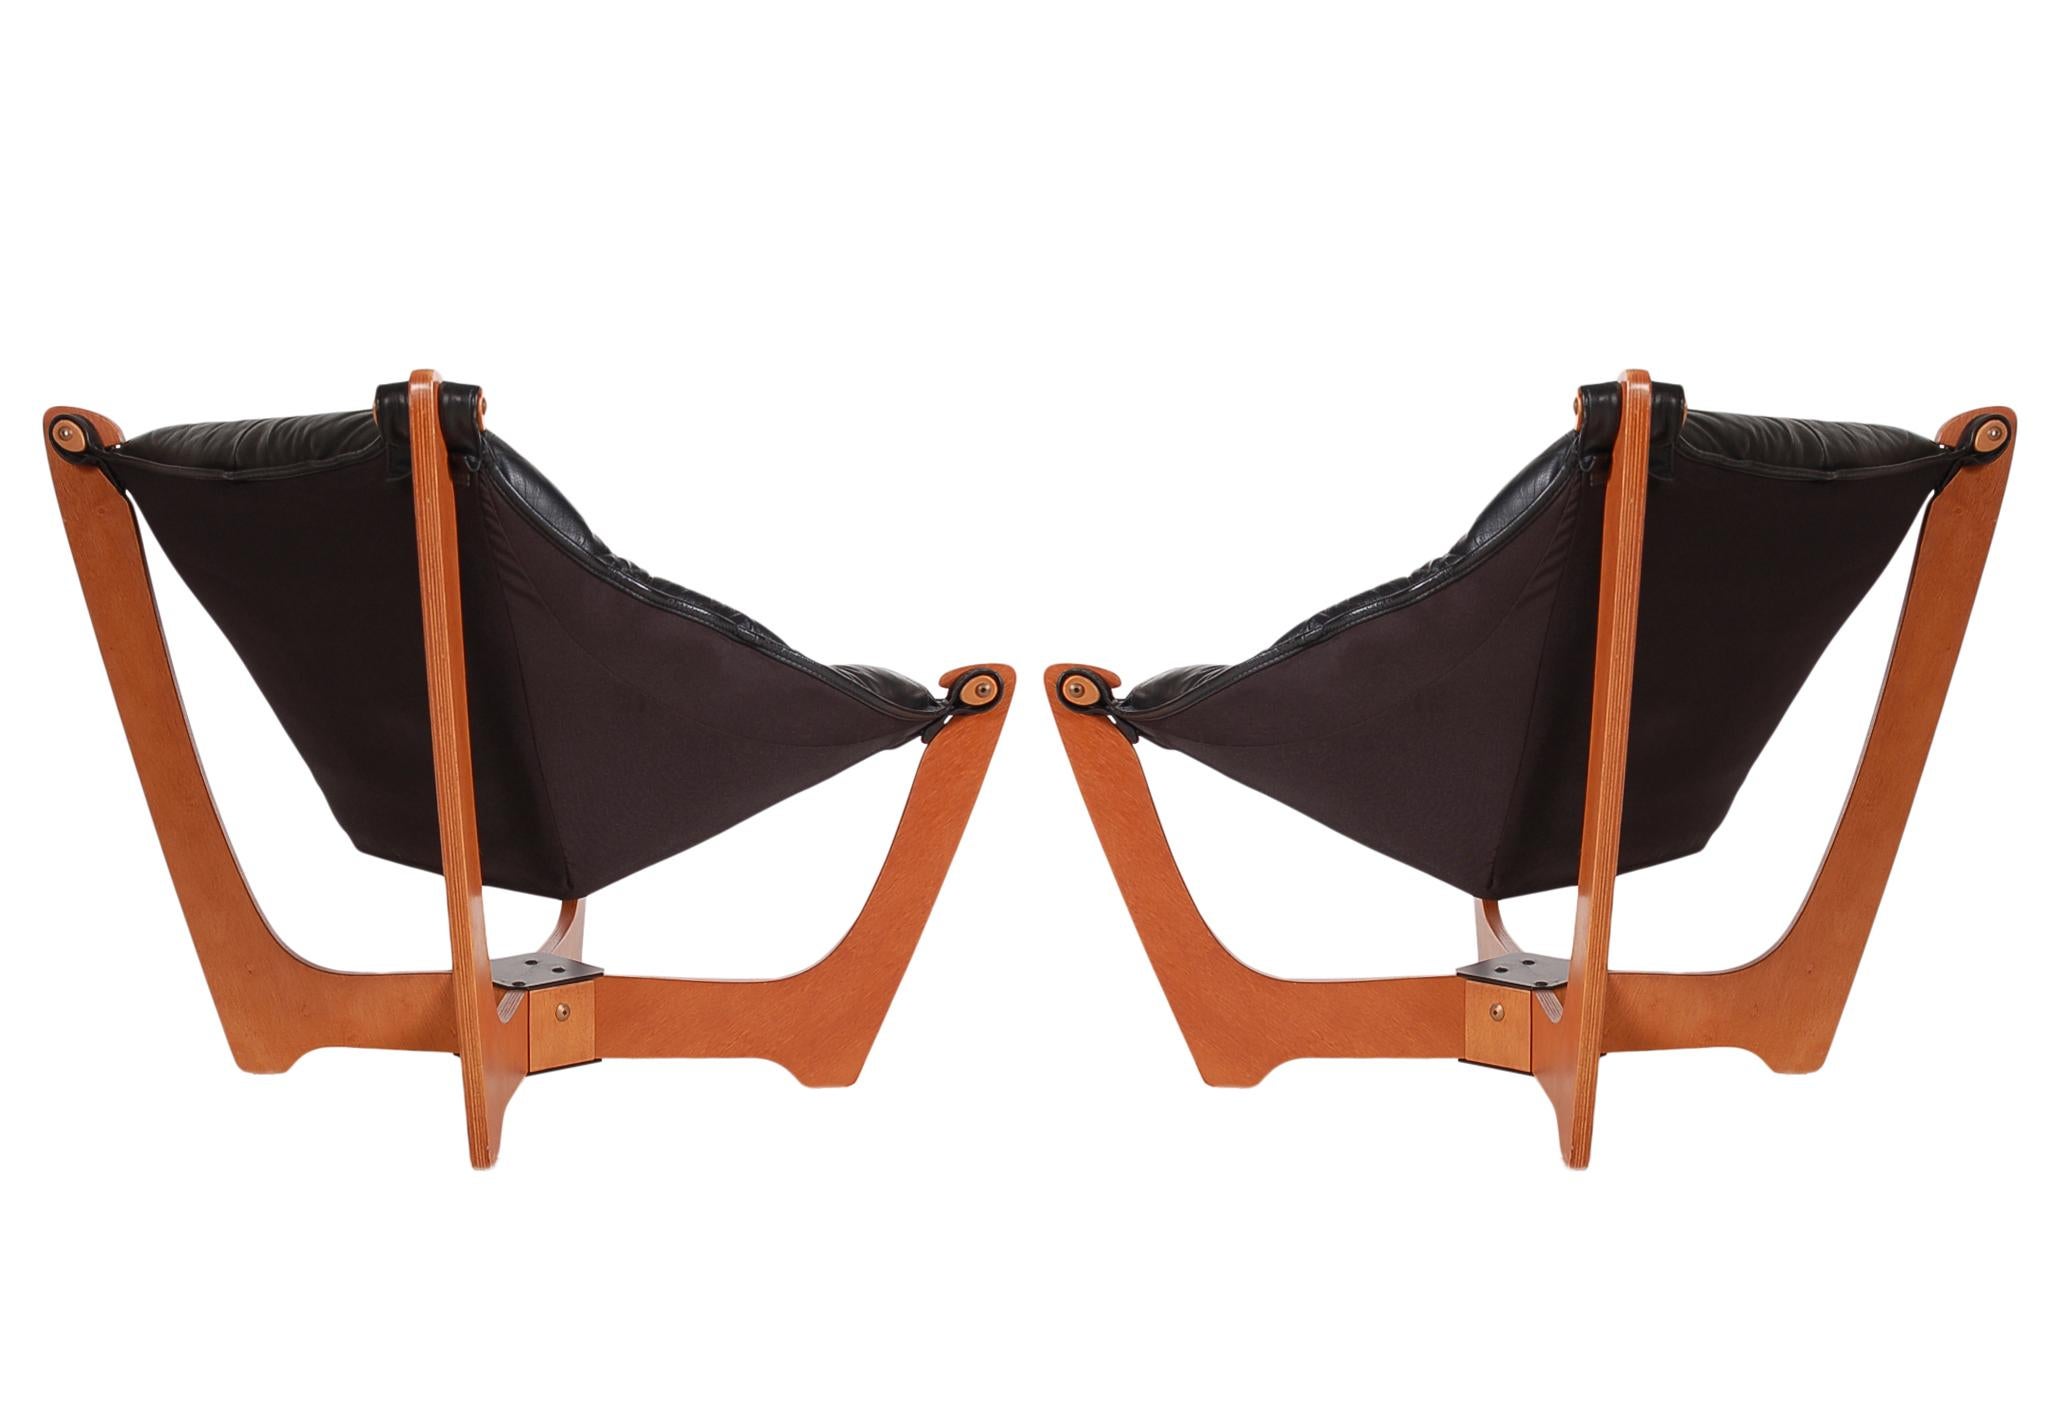 Pair of Midcentury Danish Modern Black Leather Lounge Chairs by Odd Knutsen 1